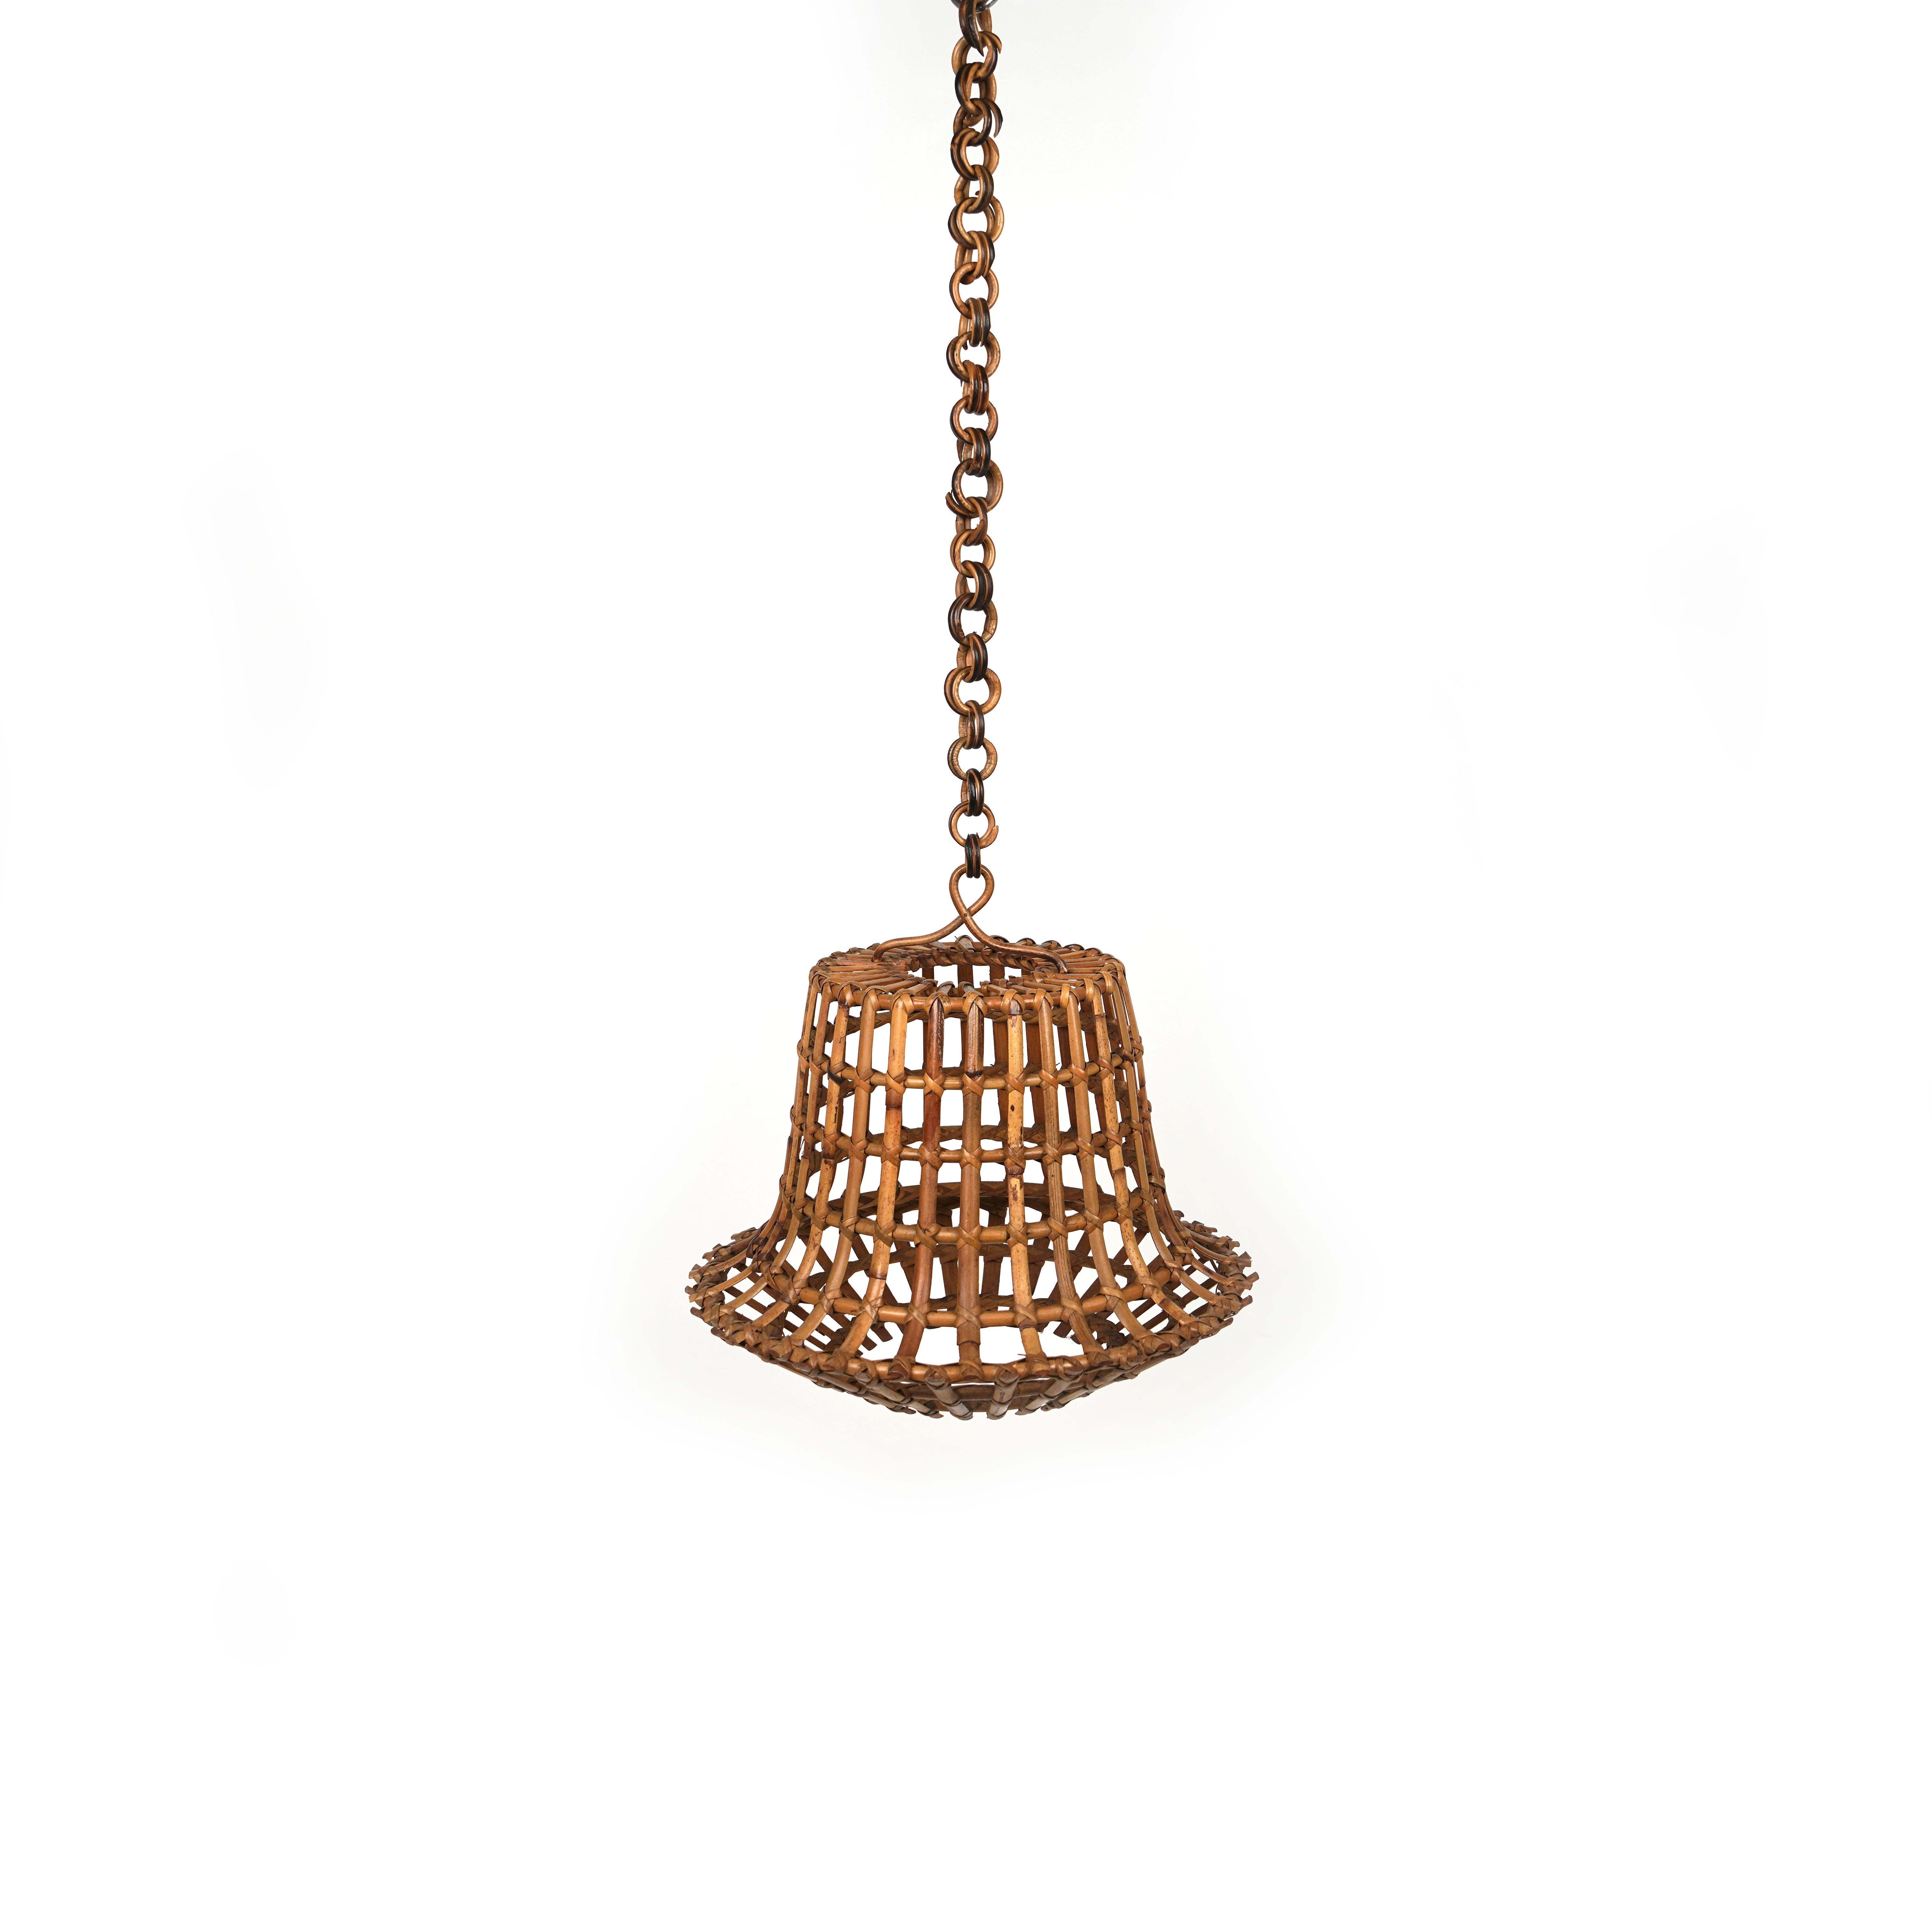 Mid-Century Modern Midcentury Bamboo and Rattan Chandelier Louis Sognot Style, Italy 1960s For Sale